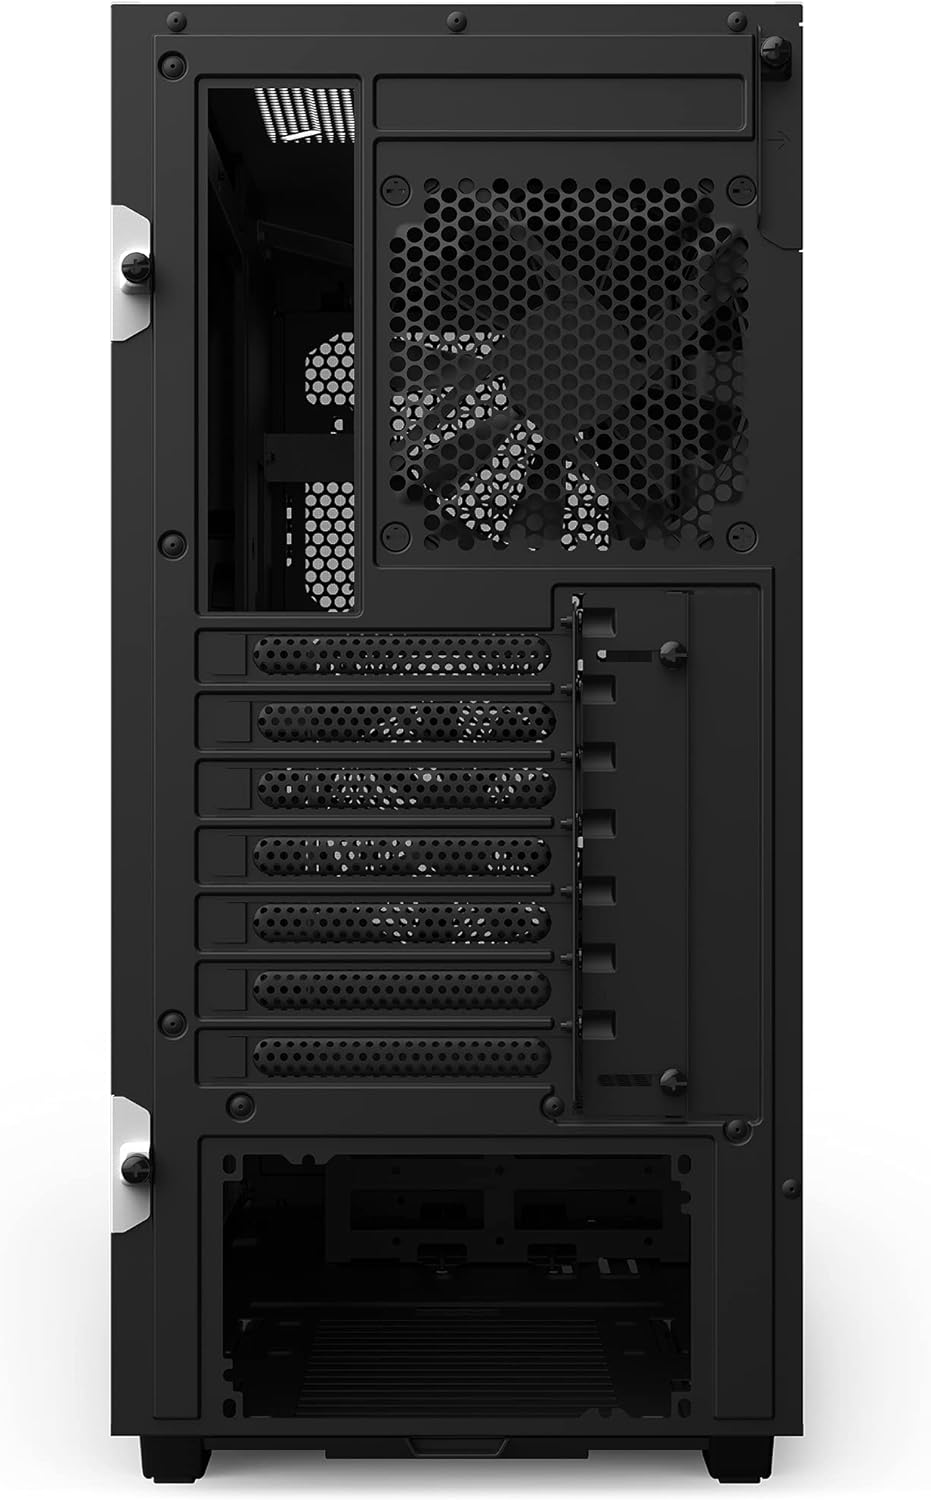 NZXT H5 Elite Compact ATX Mid-Tower PC Gaming Case – CC-H51EB-01 - Built-in RGB Lighting – Tempered Glass Front and Side Panels – Cable Management – 2 x 140mm RGB Fans Included – Black